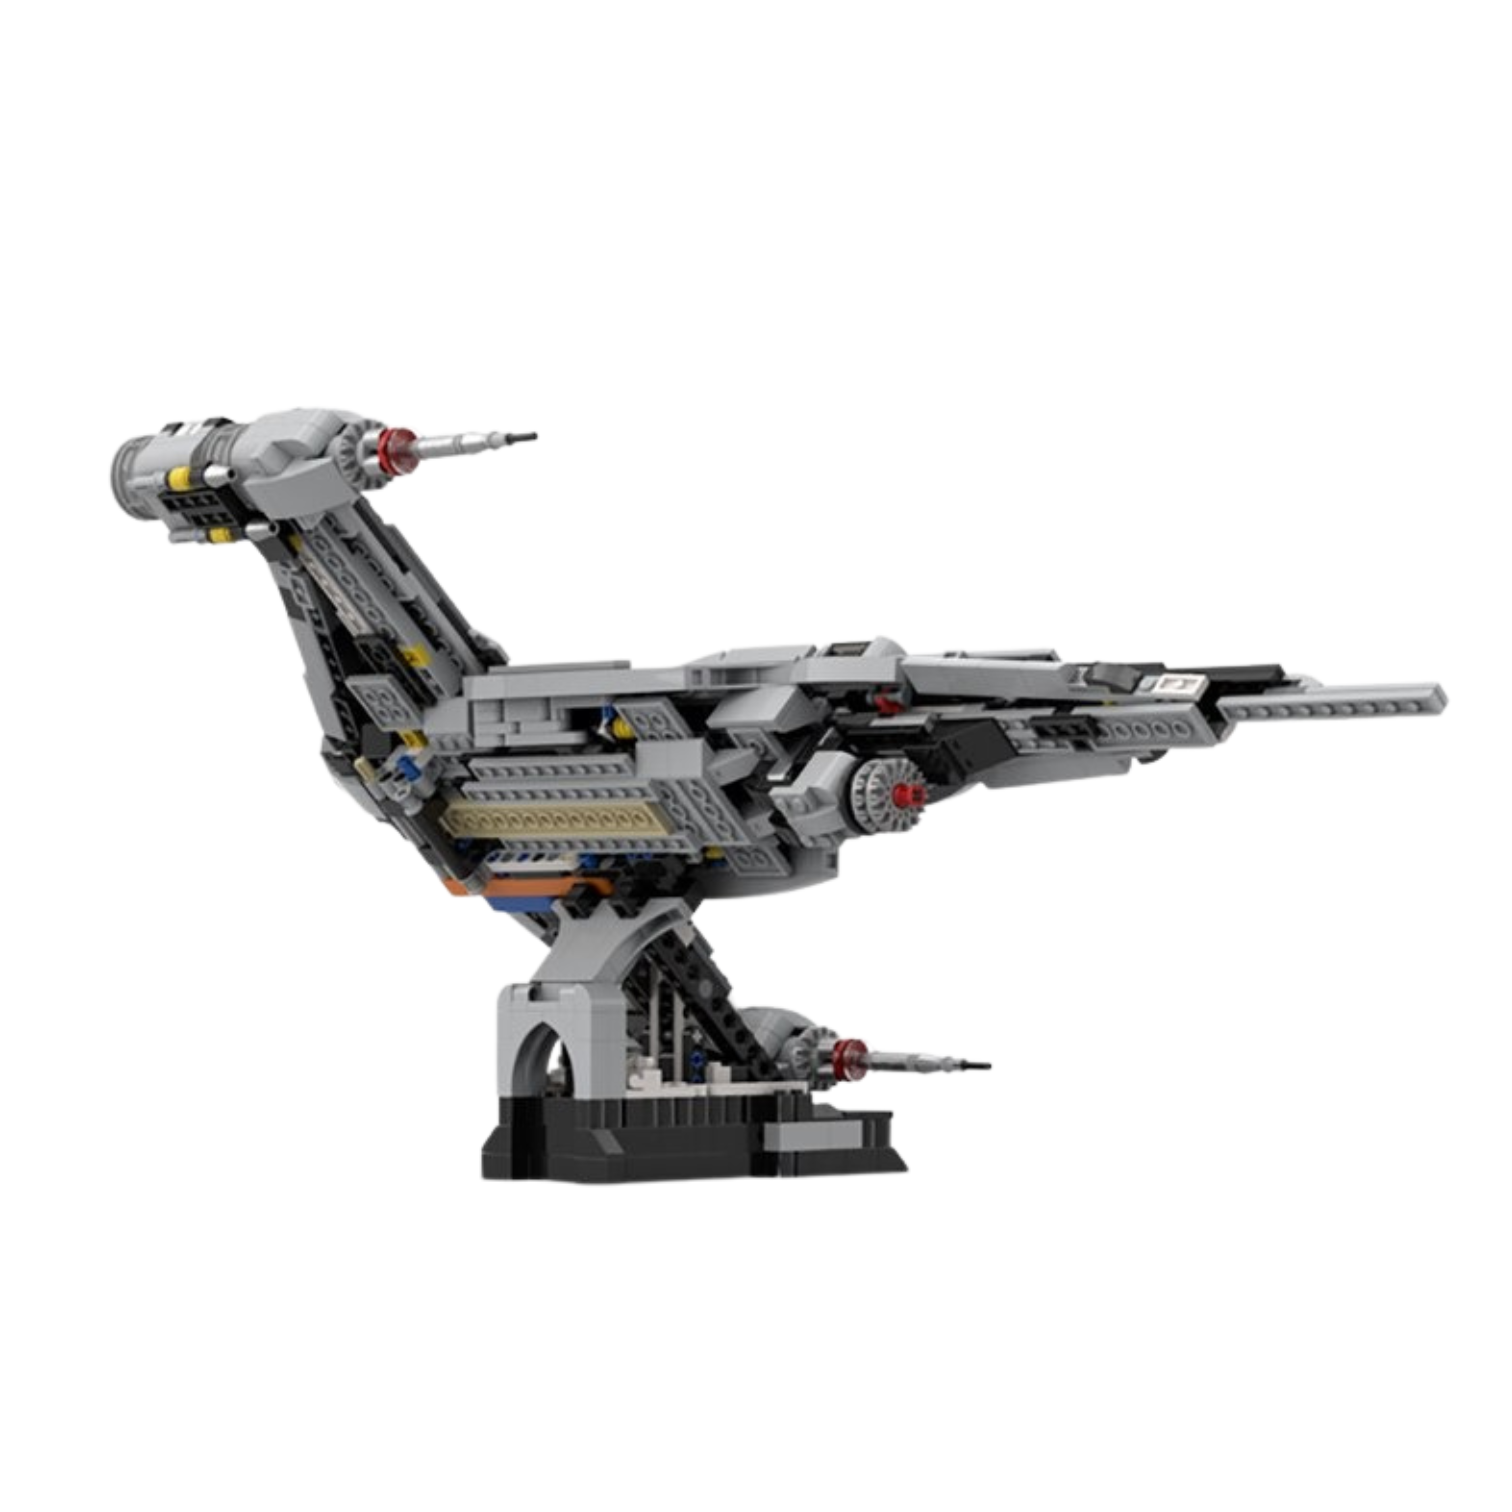 The Mandalorian'S N-1 Starfighter Moc-112743 Star Wars With 1148 Pieces -  Moc Brick Land